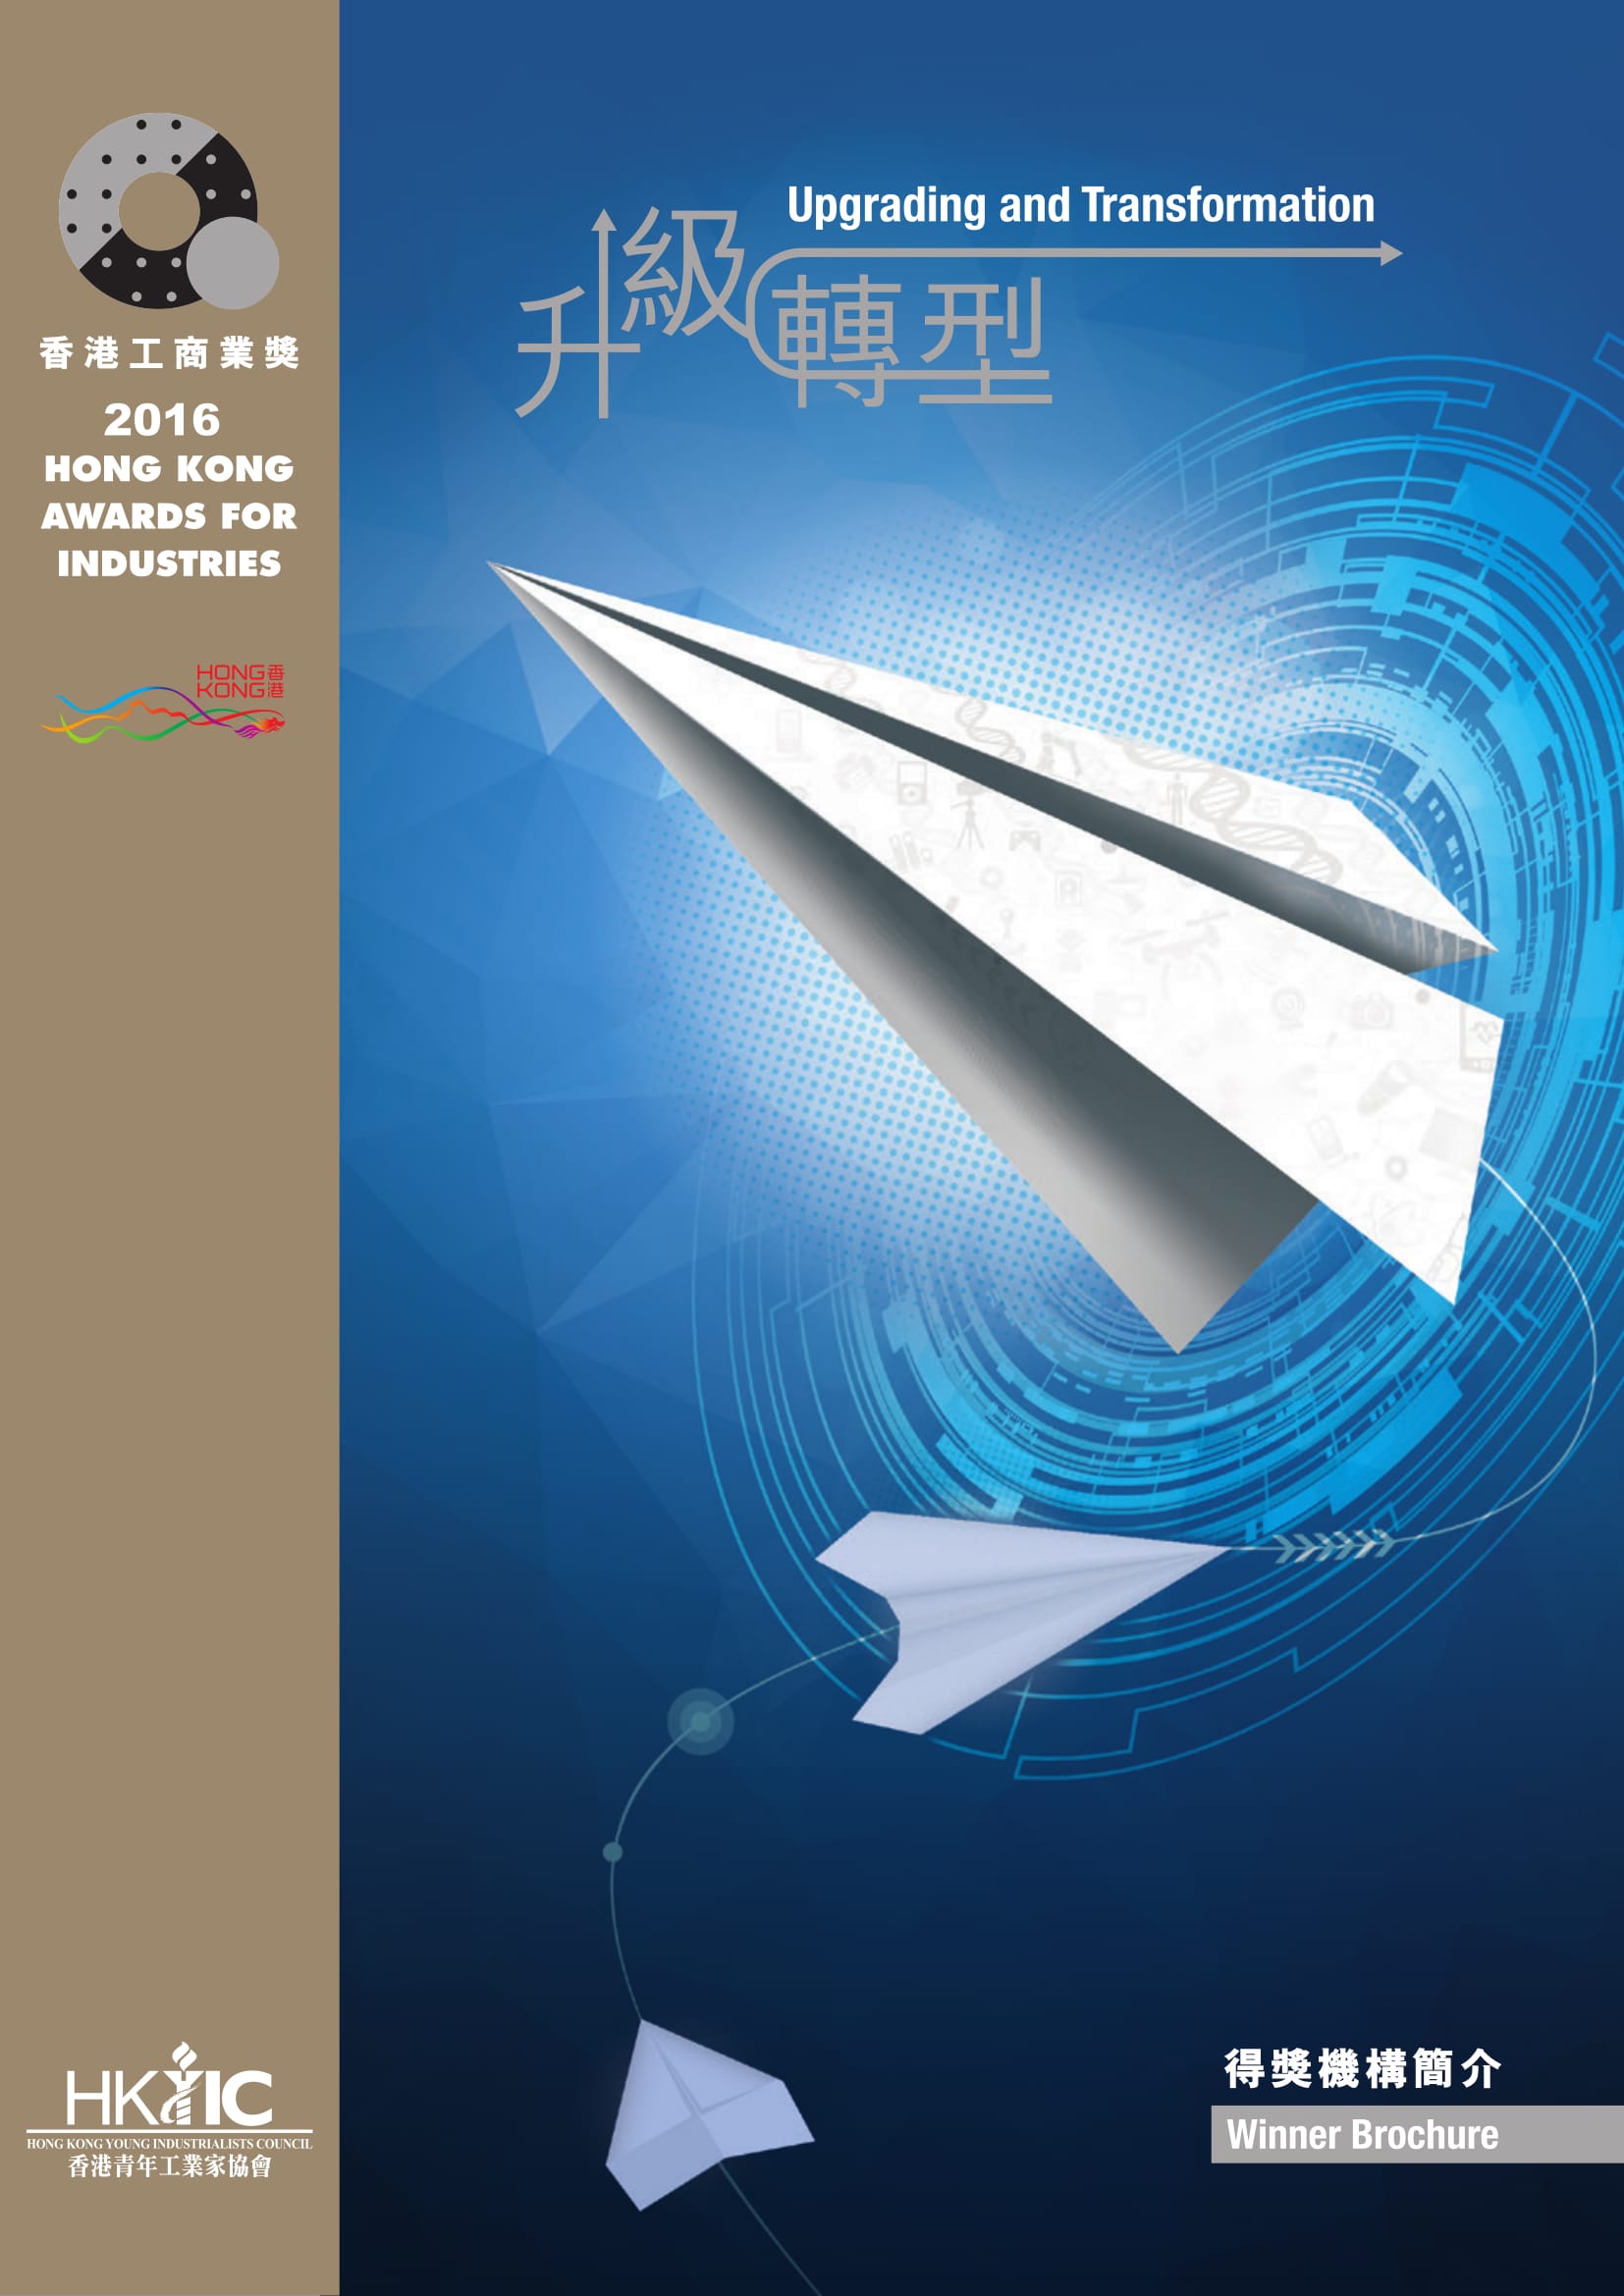 2016 Winning Brochure of the Upgrading and Transformation